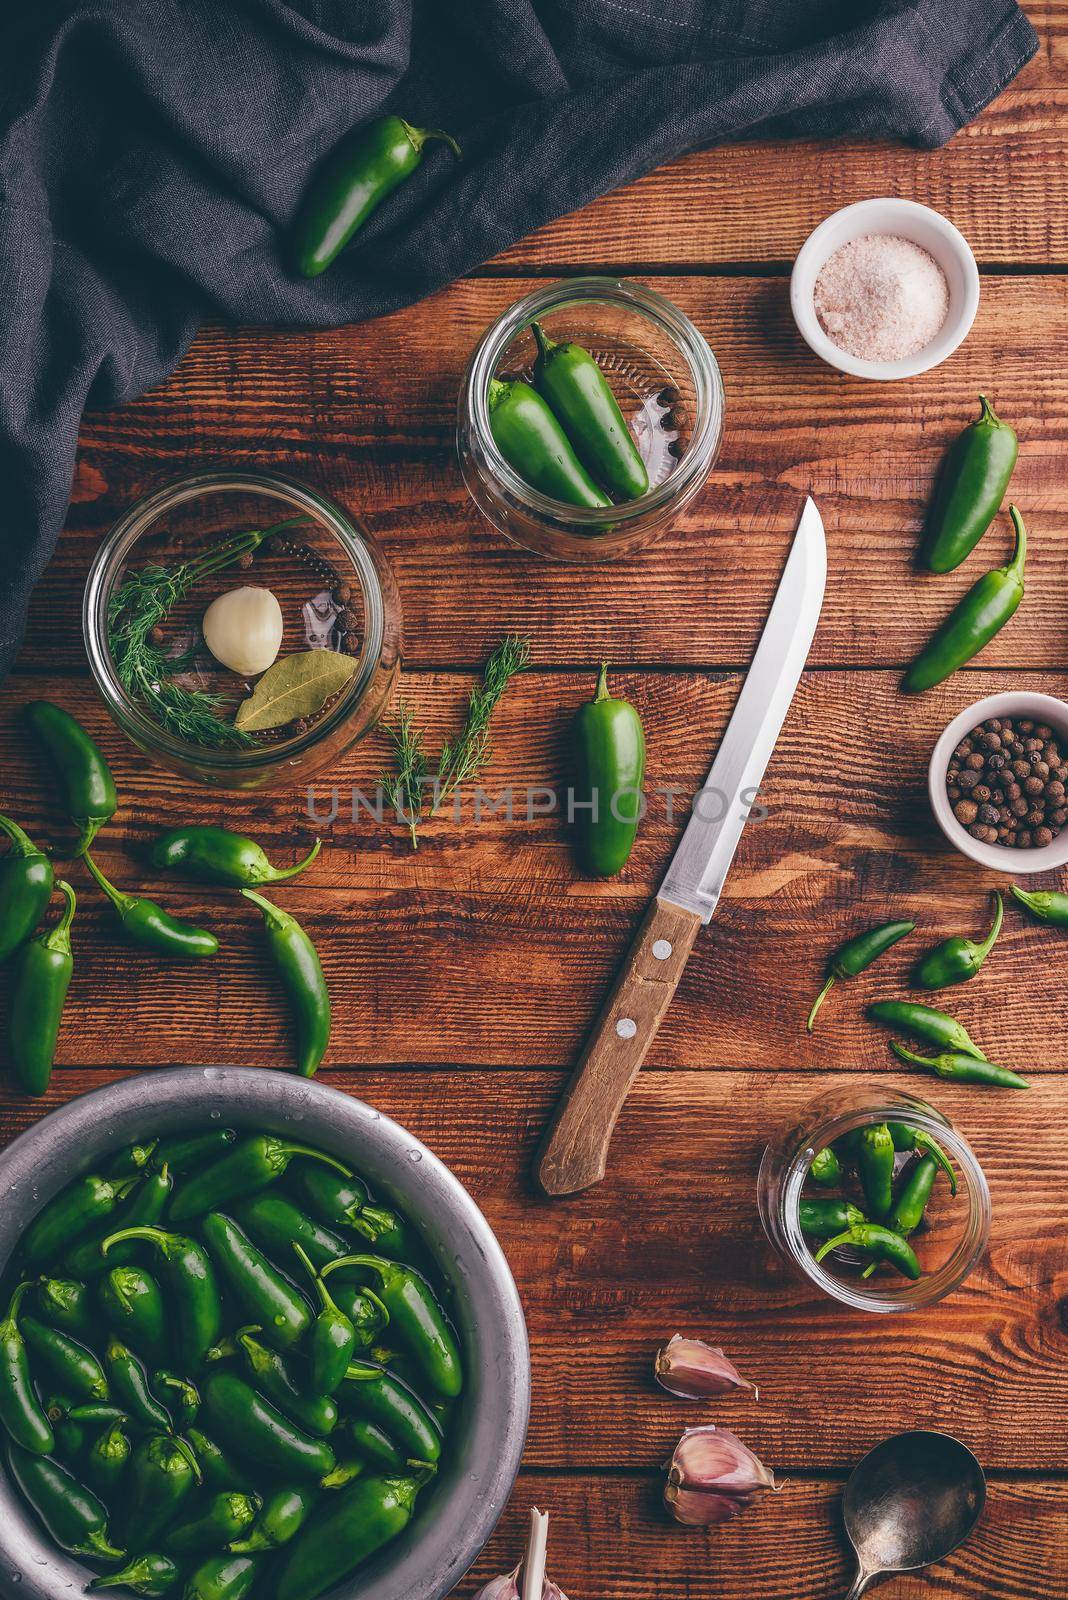 Preparation Of Canned Jalapeno Peppers by Seva_blsv